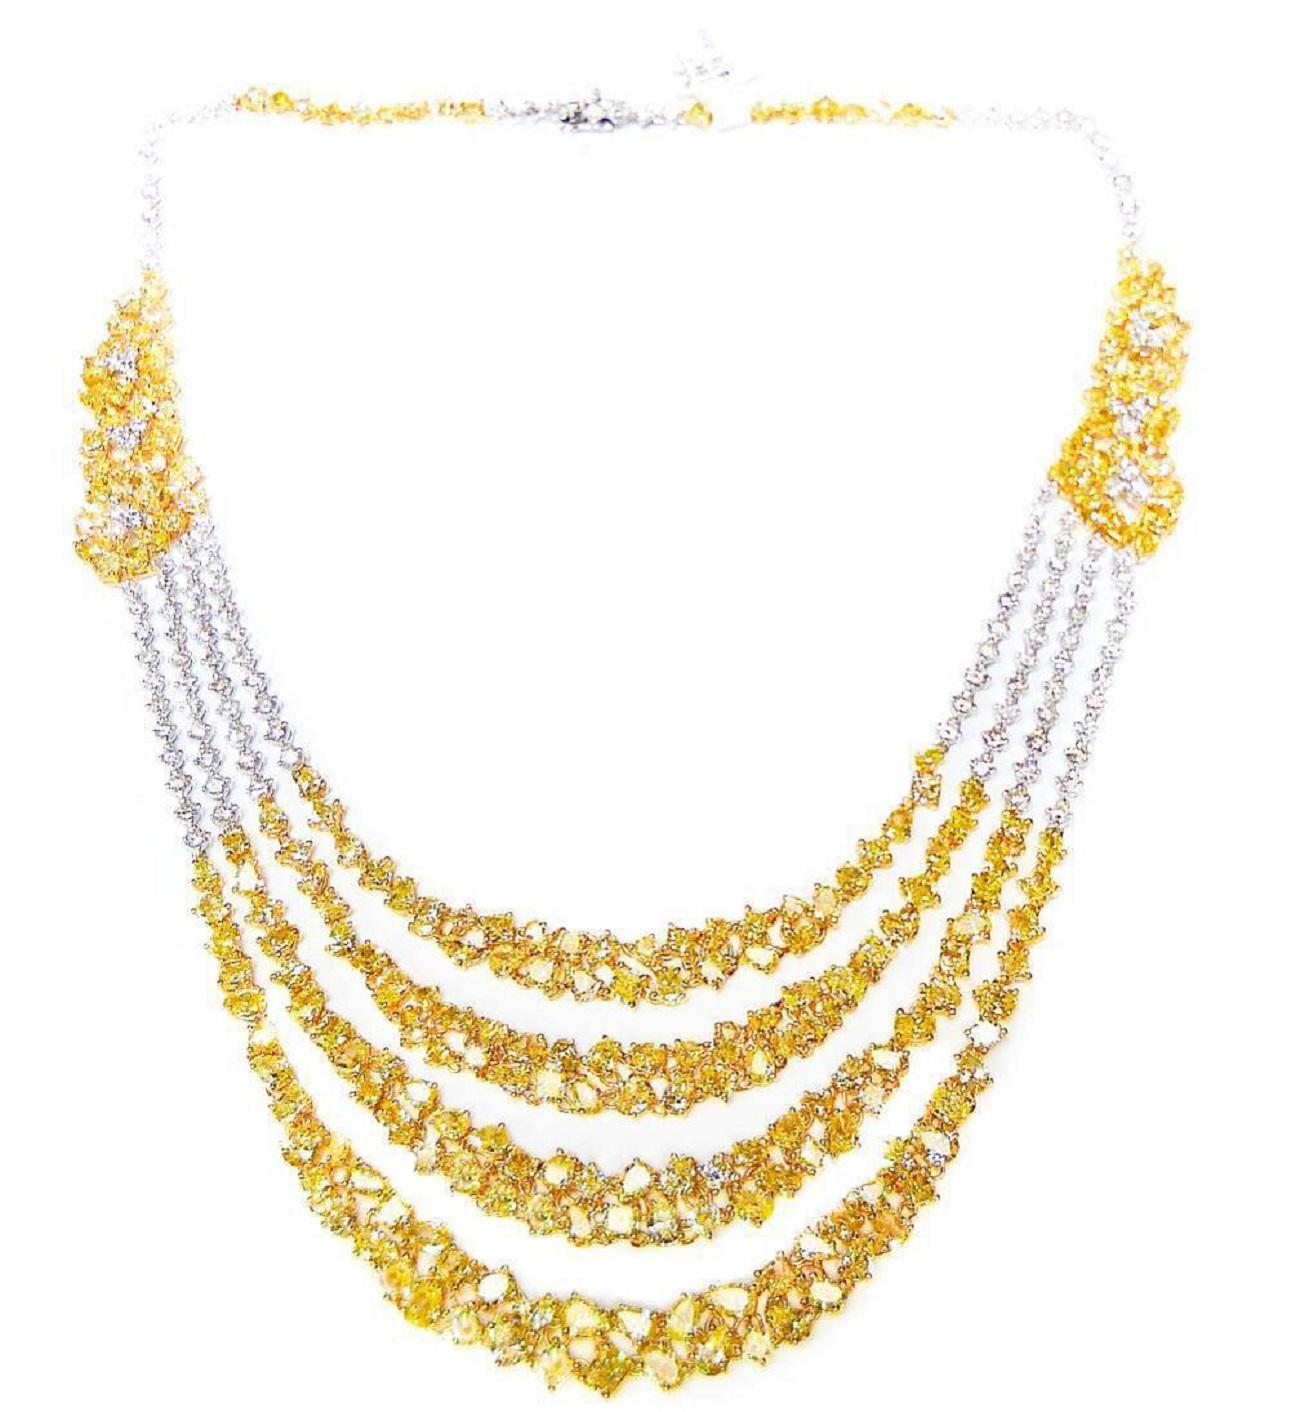 Mixed Cut Diana M. Fancy Yellow Diamond Necklace Feturing 49.73ct of diamond cascading  For Sale